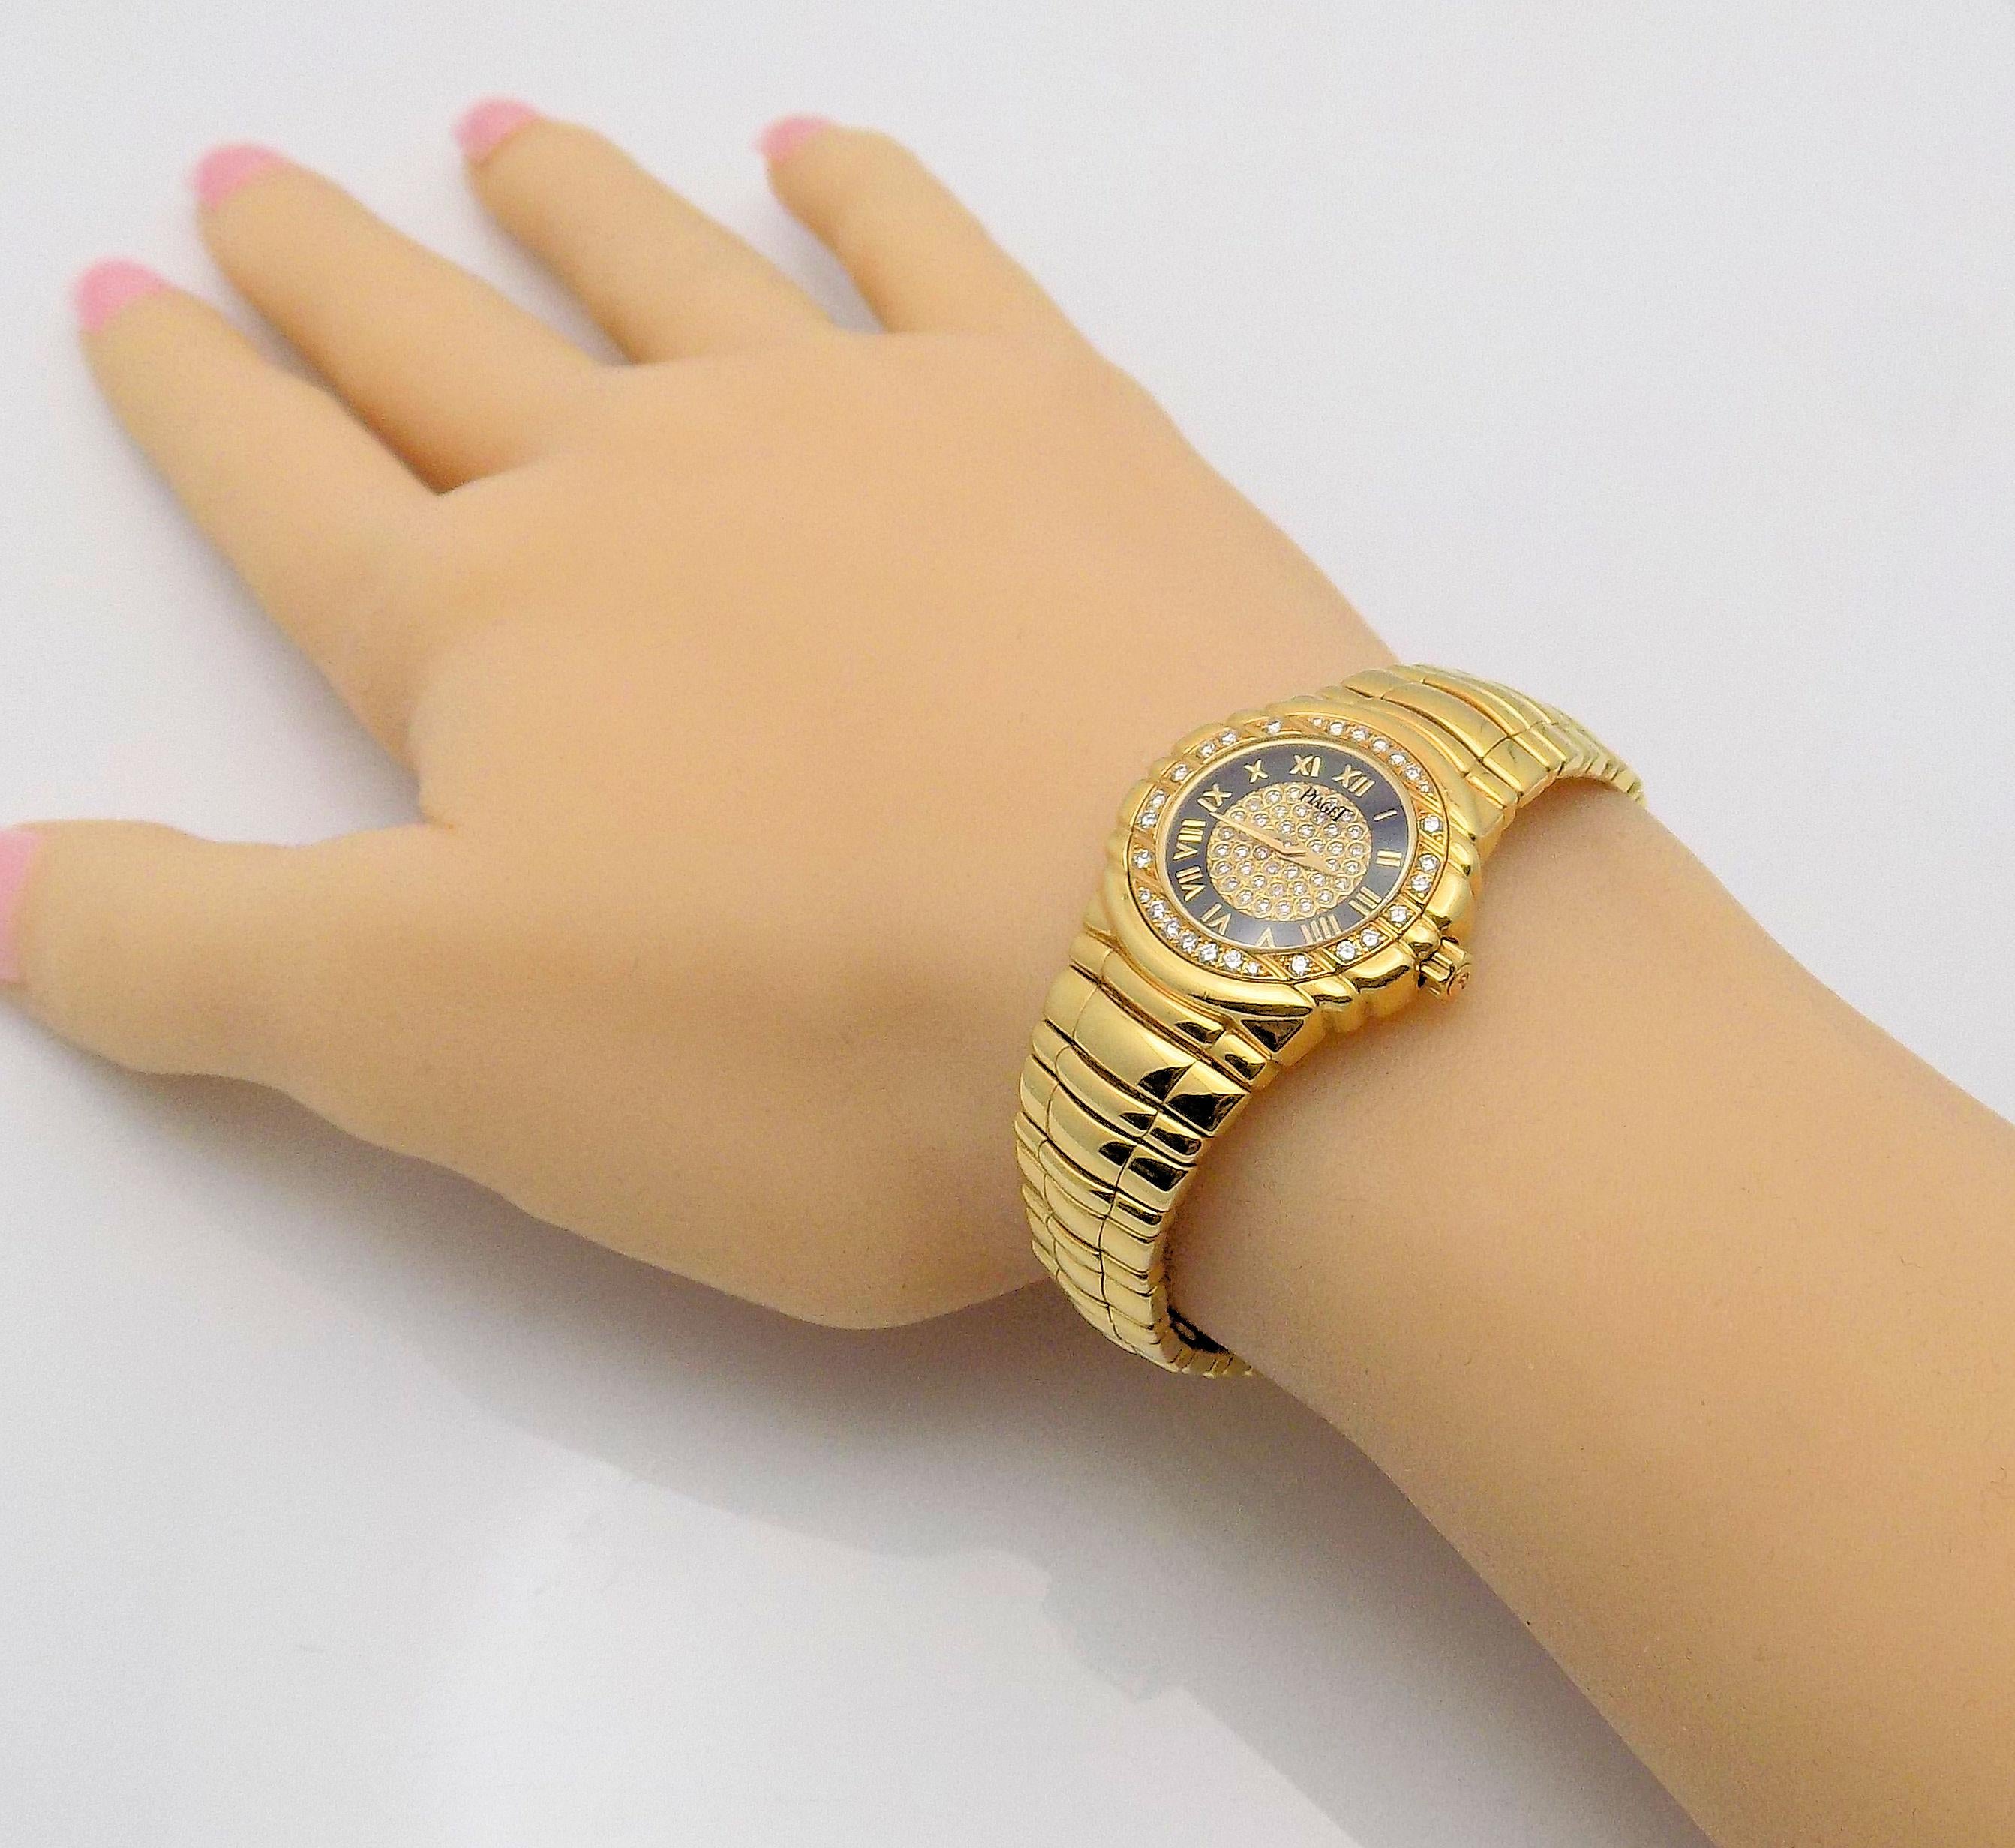 Stunning 18 Karat Yellow Gold Lady's Piaget Tanagra Wristwatch with Black Face featuring 70 Round Brilliant Diamonds 0.35 Carat Total Weight, VS, G; with Box & Papers; Model: 16033.M.401.D; Serial #617922; Roman Numerals; 25 MM Case; 1997; Swiss